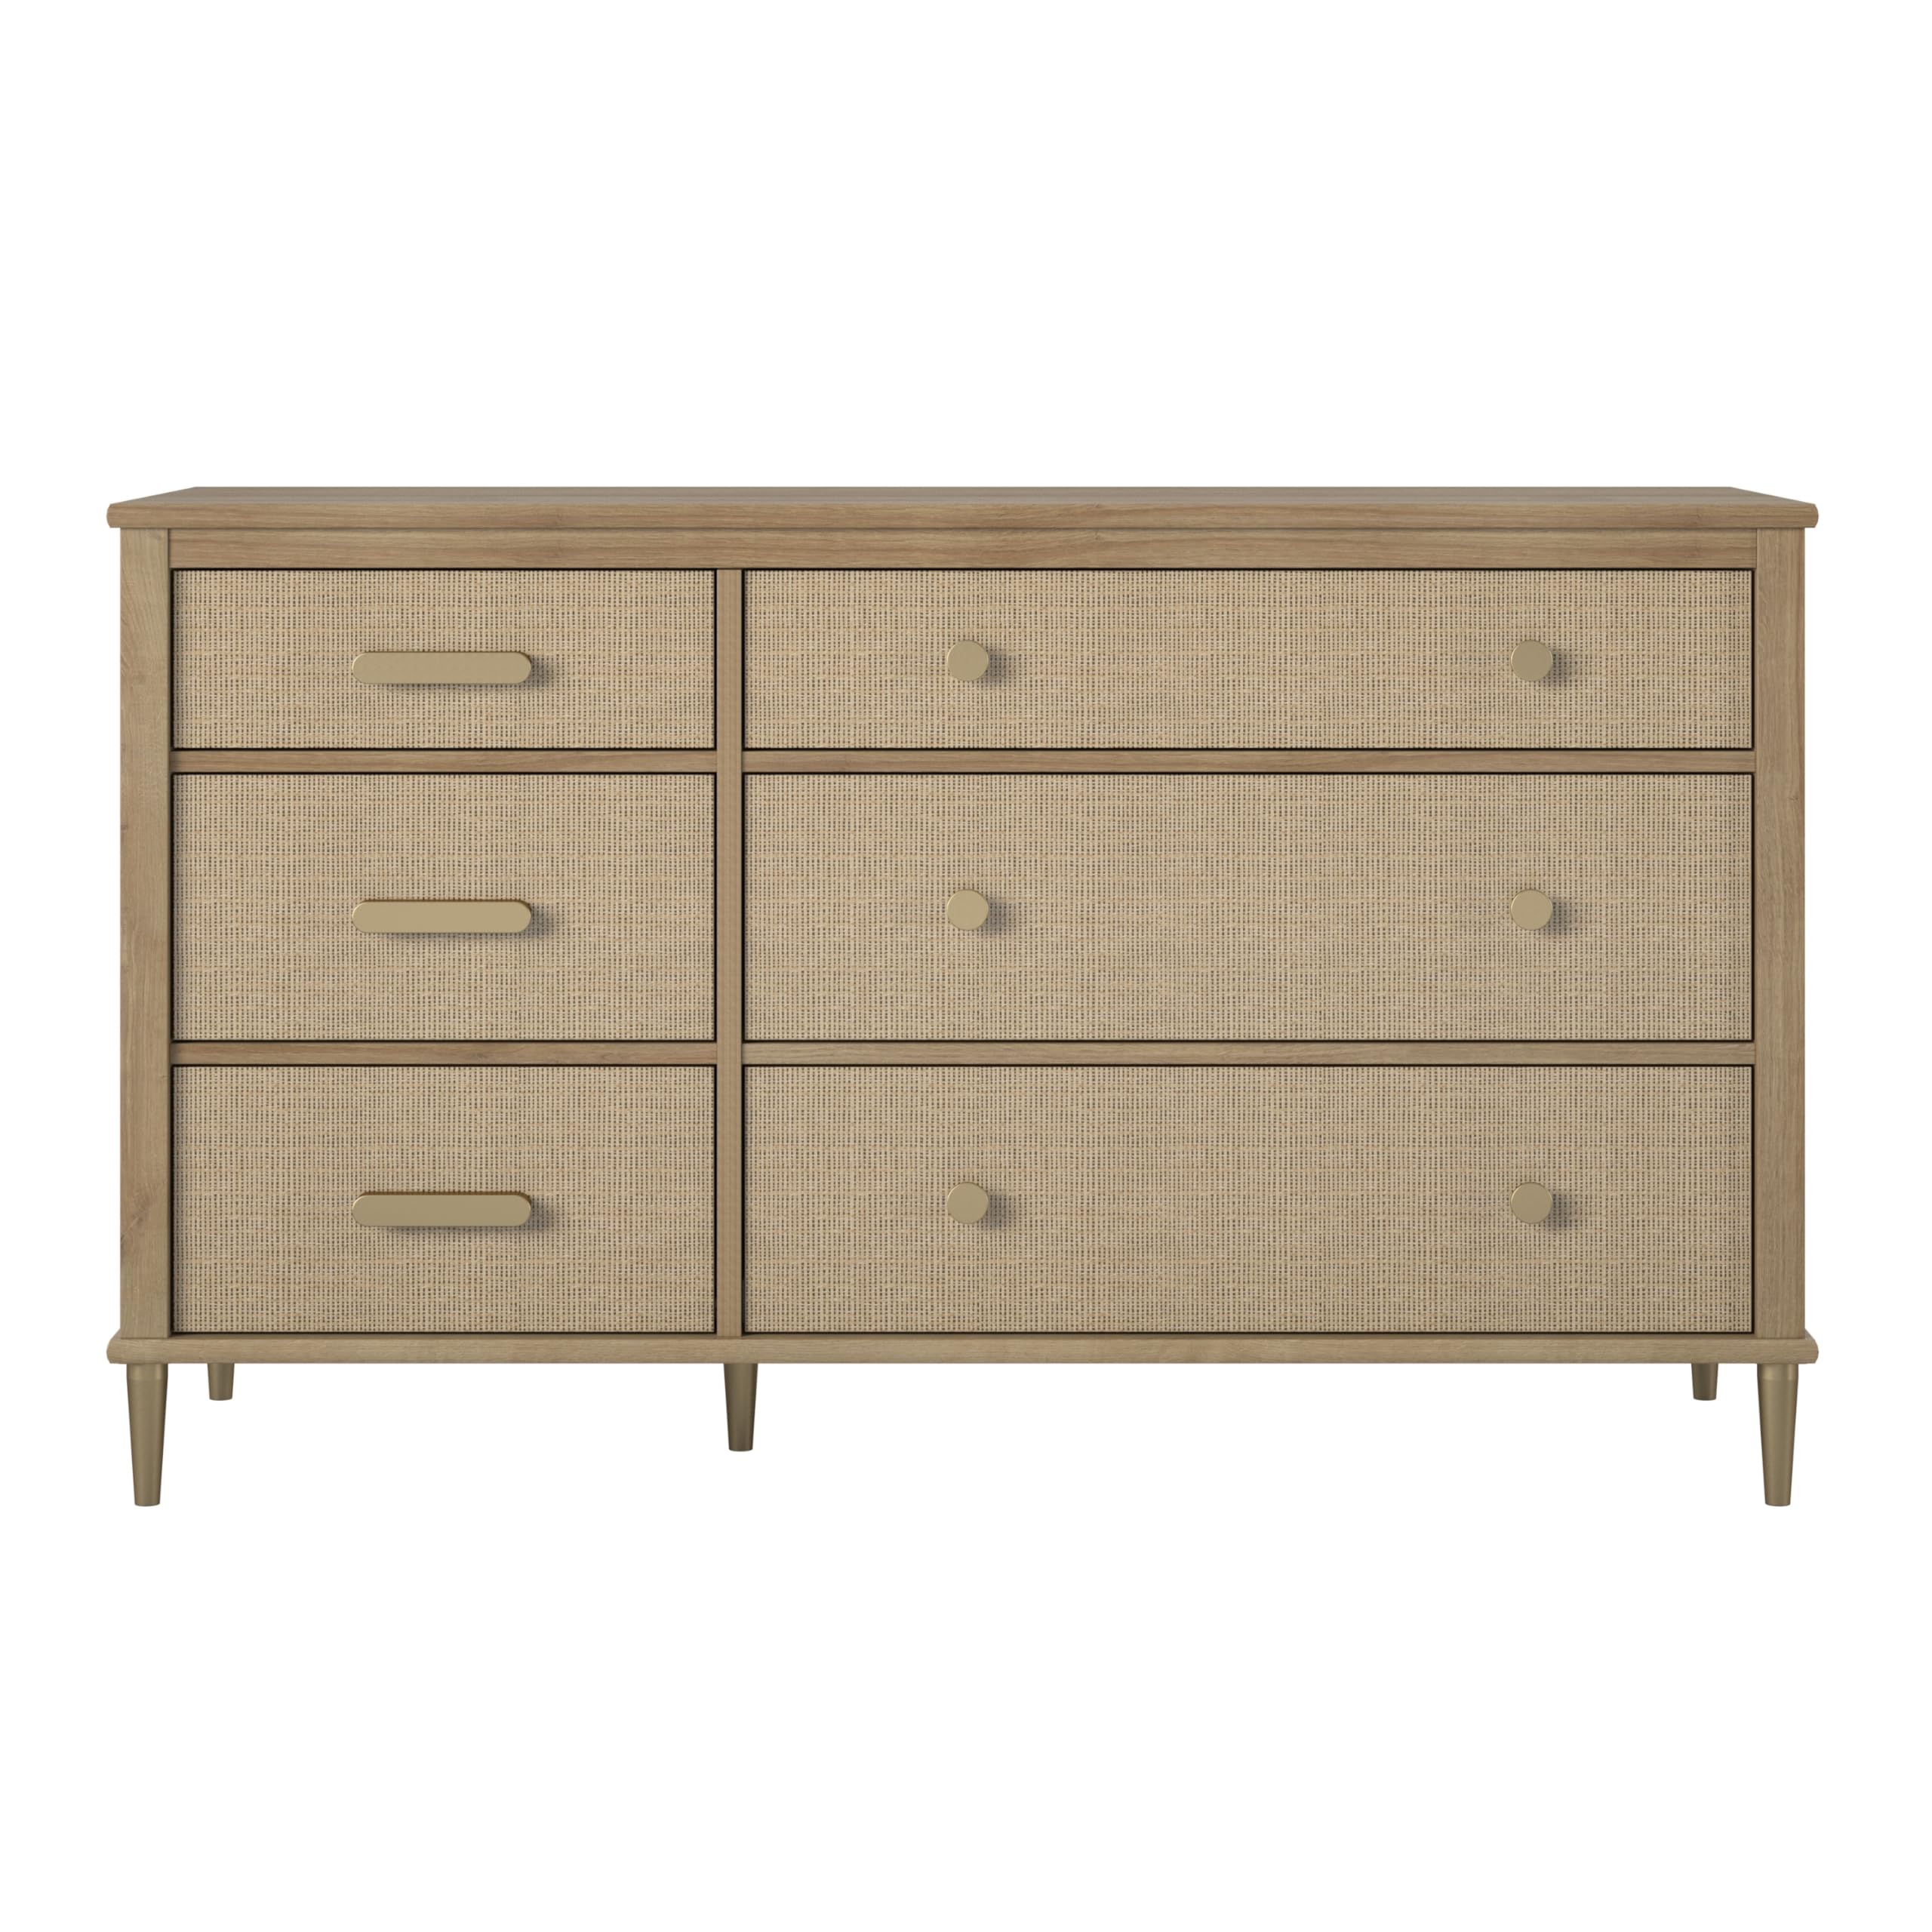 Little Seeds Shiloh Convertible 6 Drawer Dresser, Natural and Faux Rattan